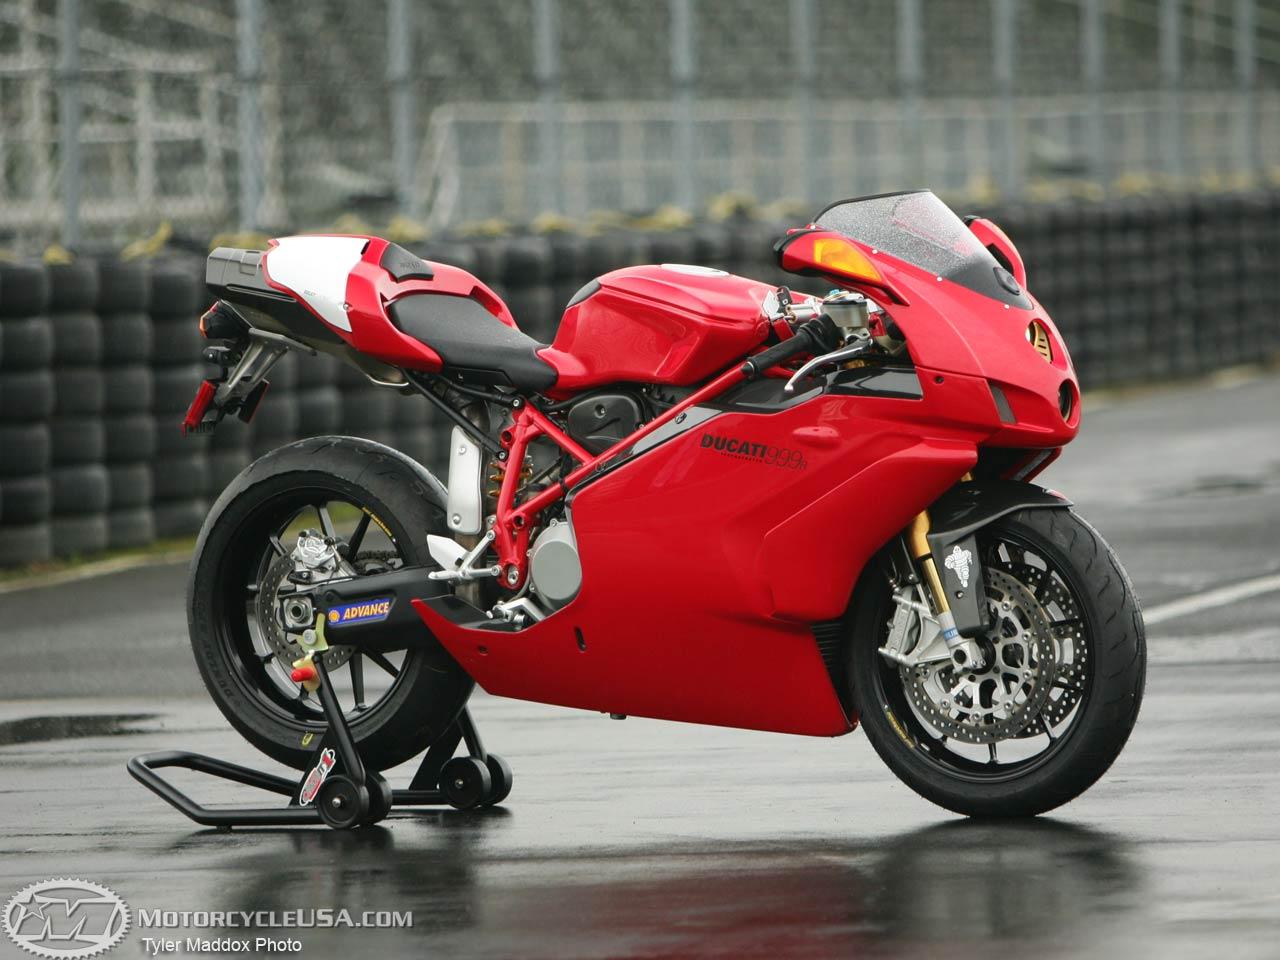 Ducati 999 R: pics, specs and information